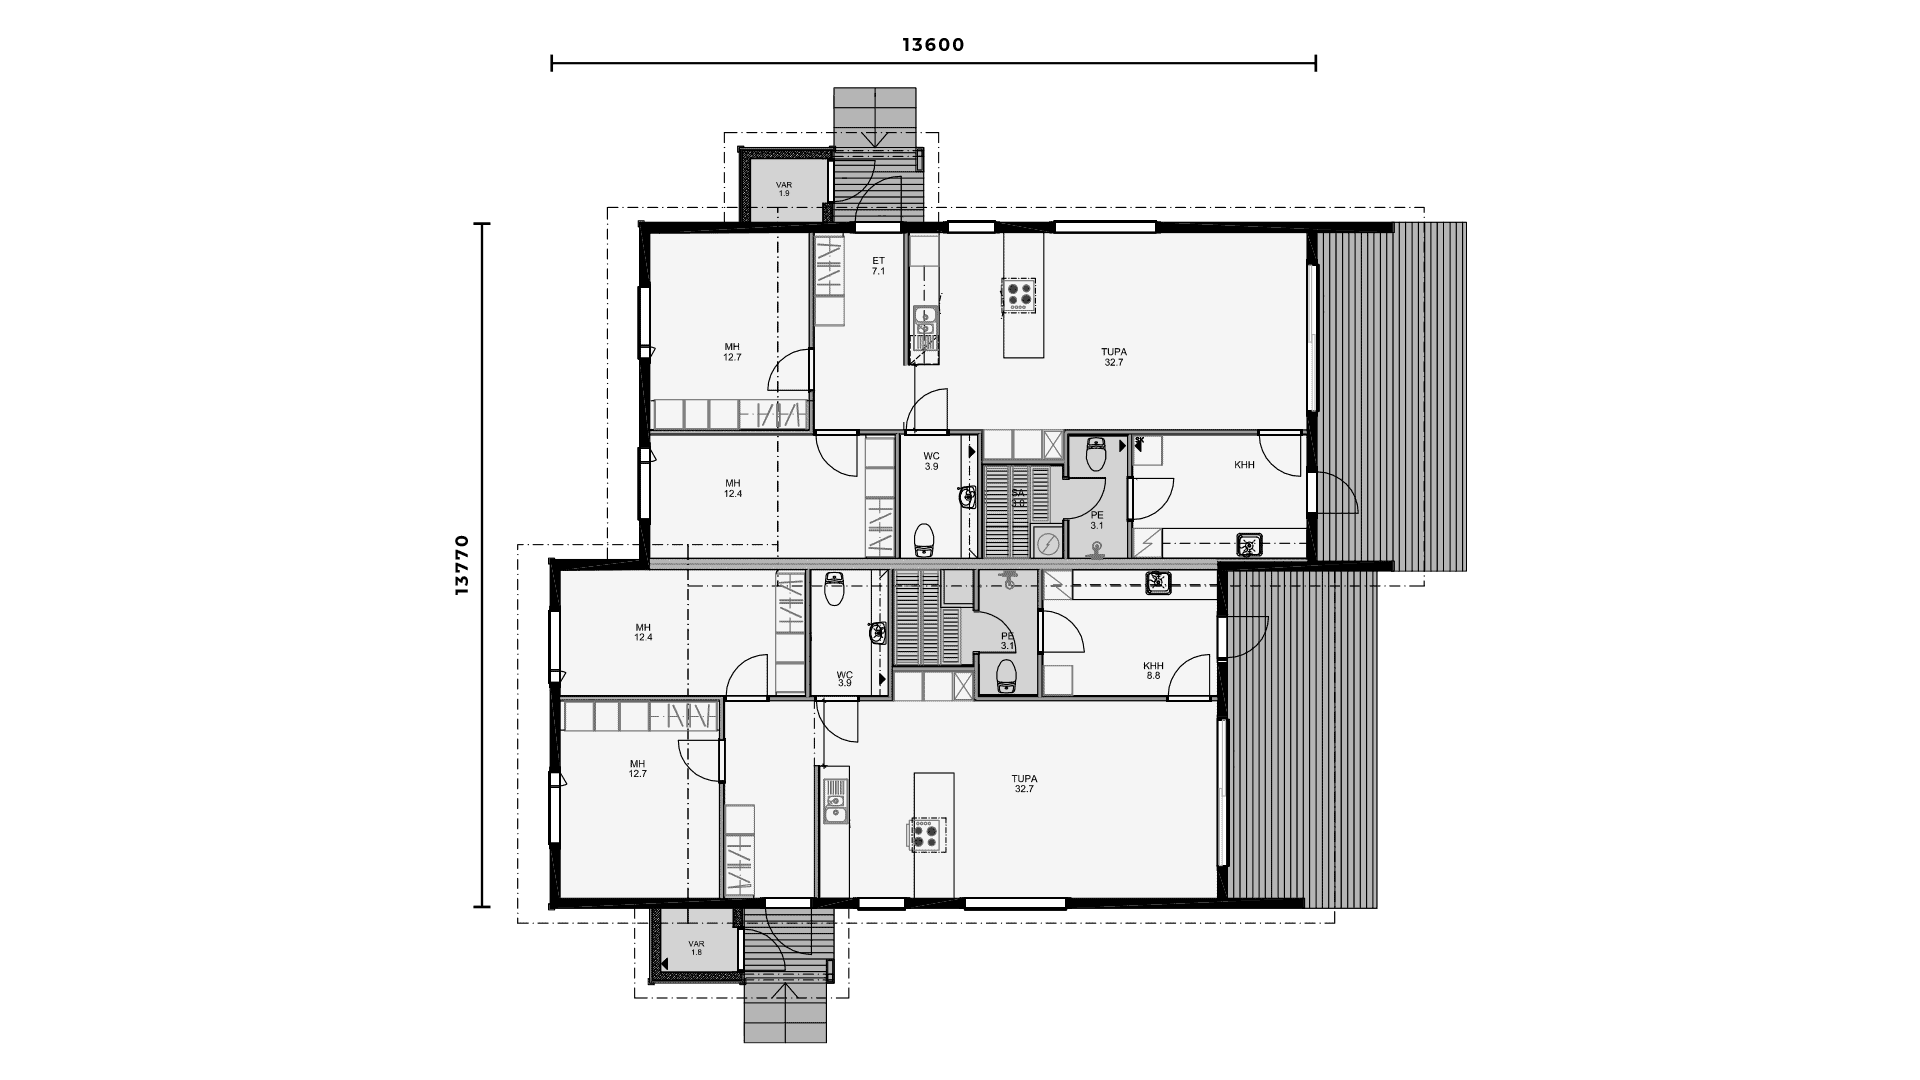 The floor plan of the log semi-detached home.